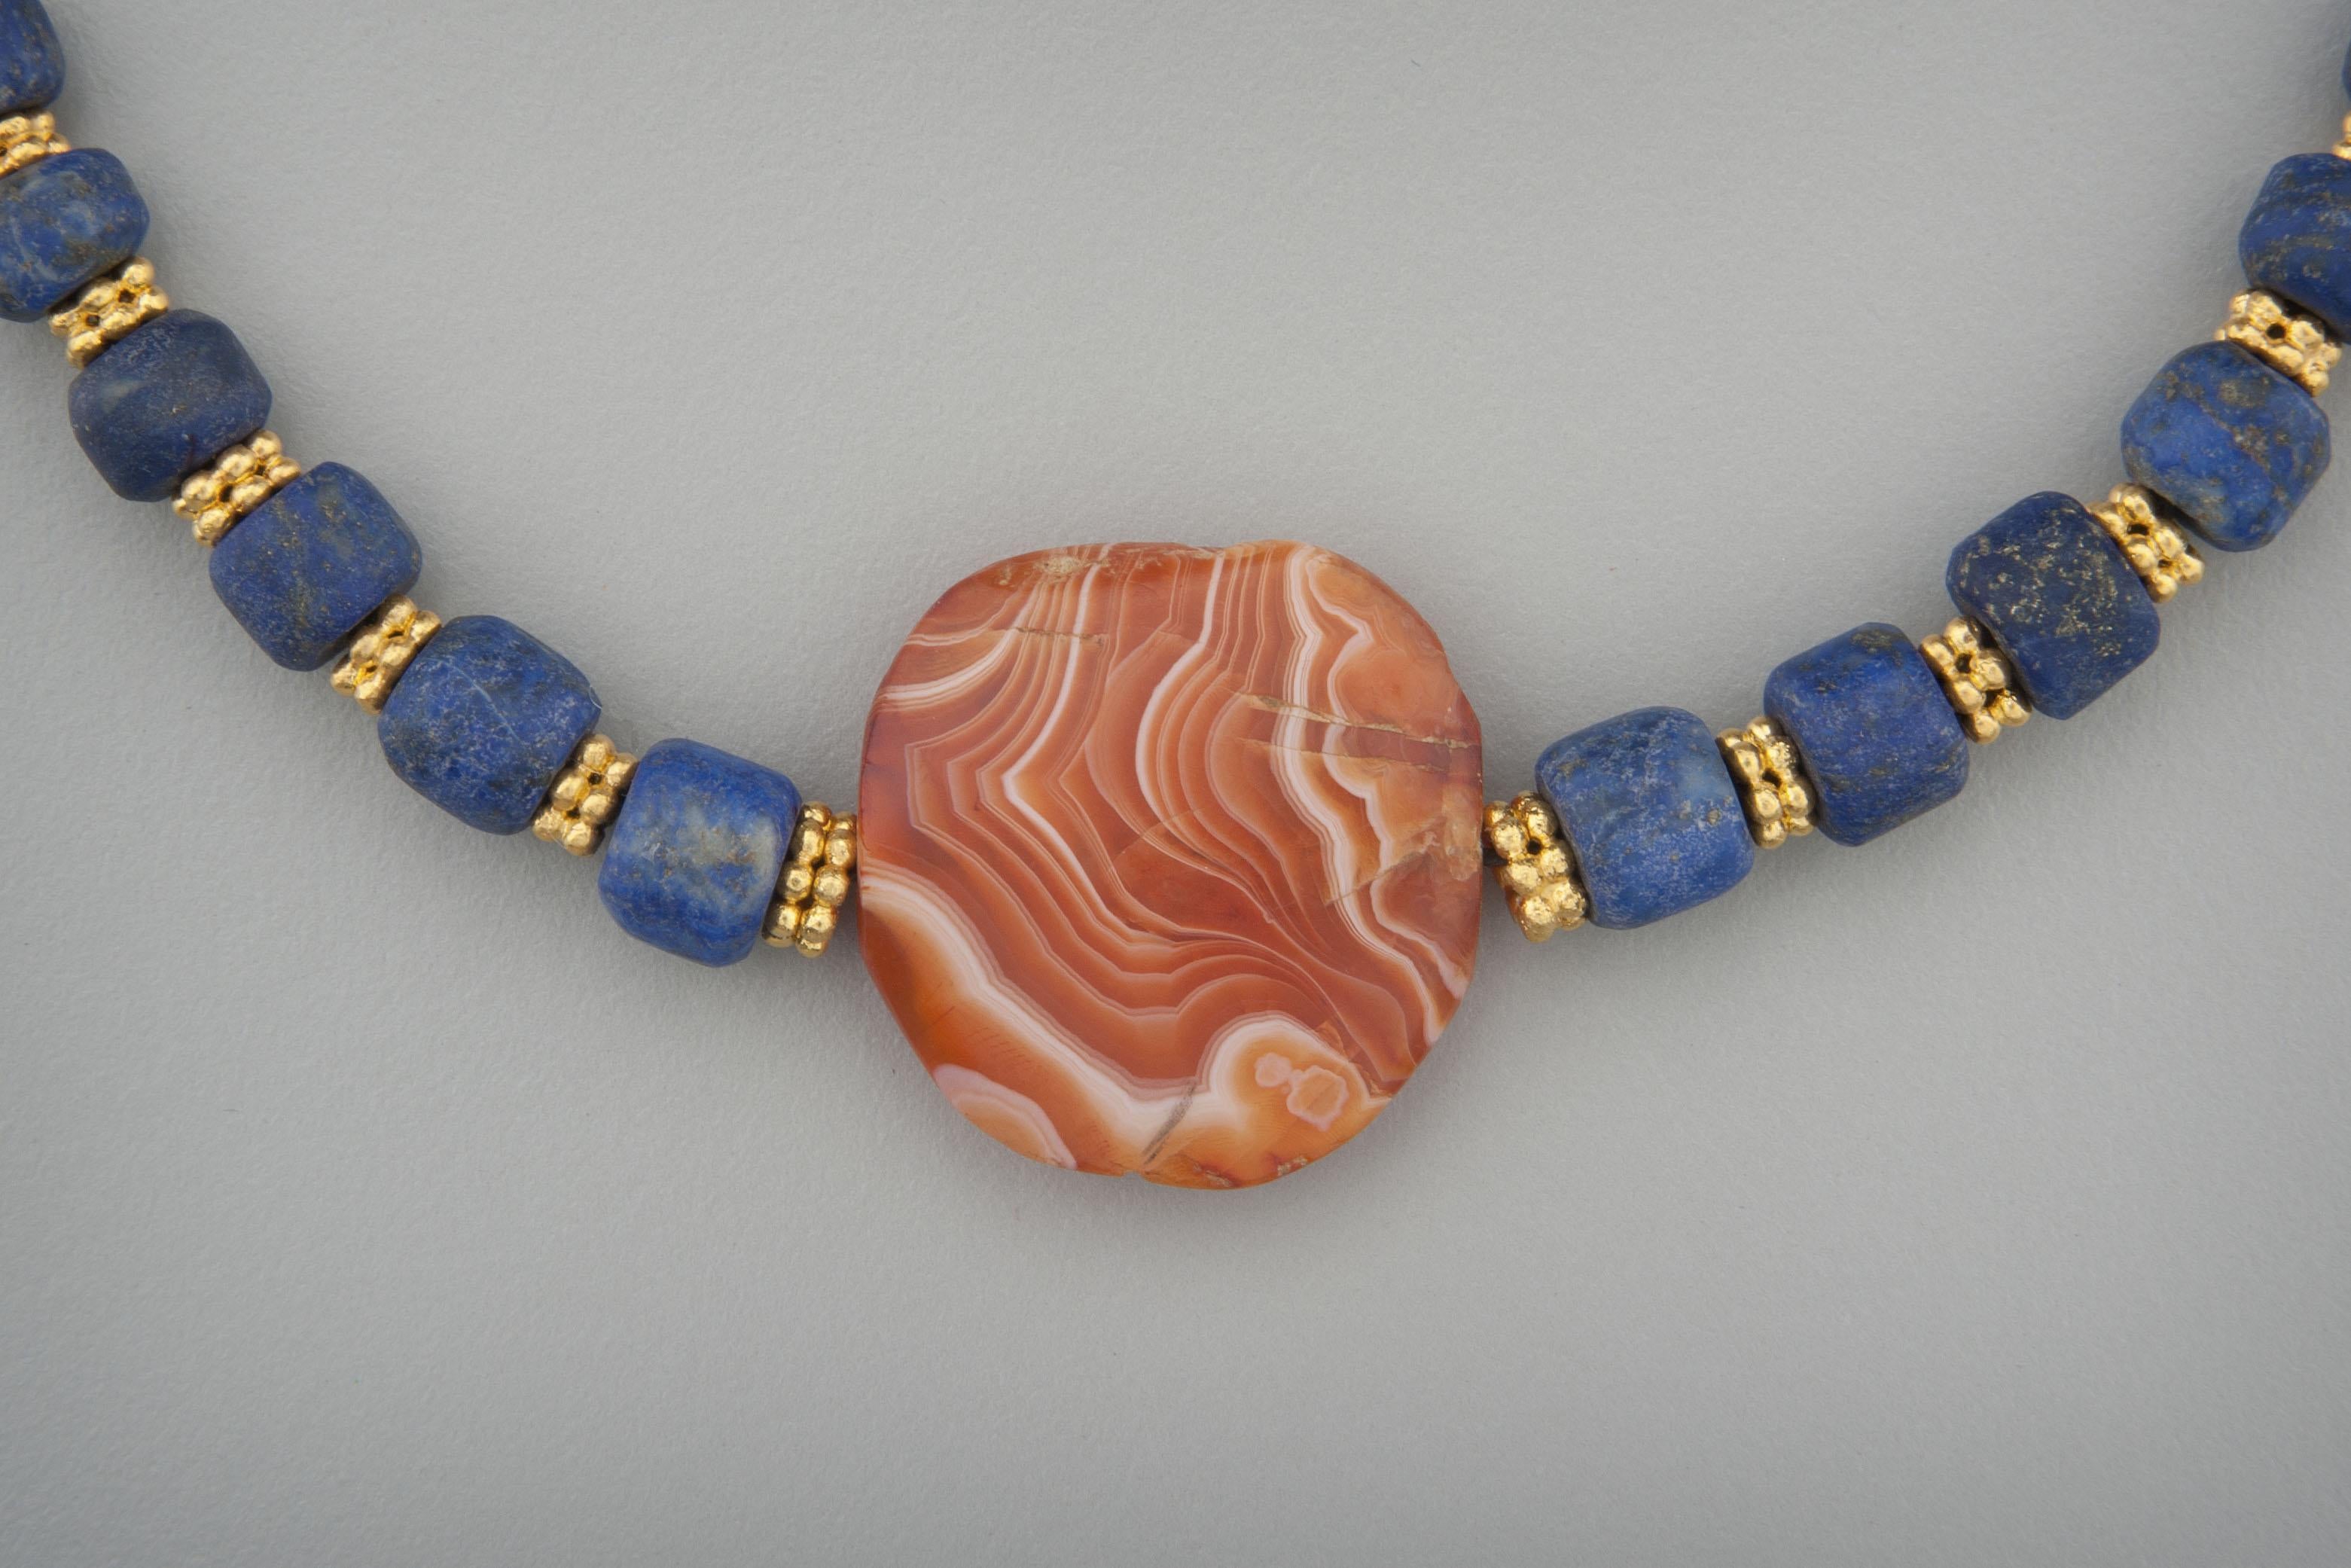 Thirty-five lapis lazuli beads spaced with 24k gold double layer granulated ring beads with a tabular sardonyx bead at the center.  Gold beading tips and a hook and eye clasp complete the necklace. The sardonyx is carnelian veined with transparent